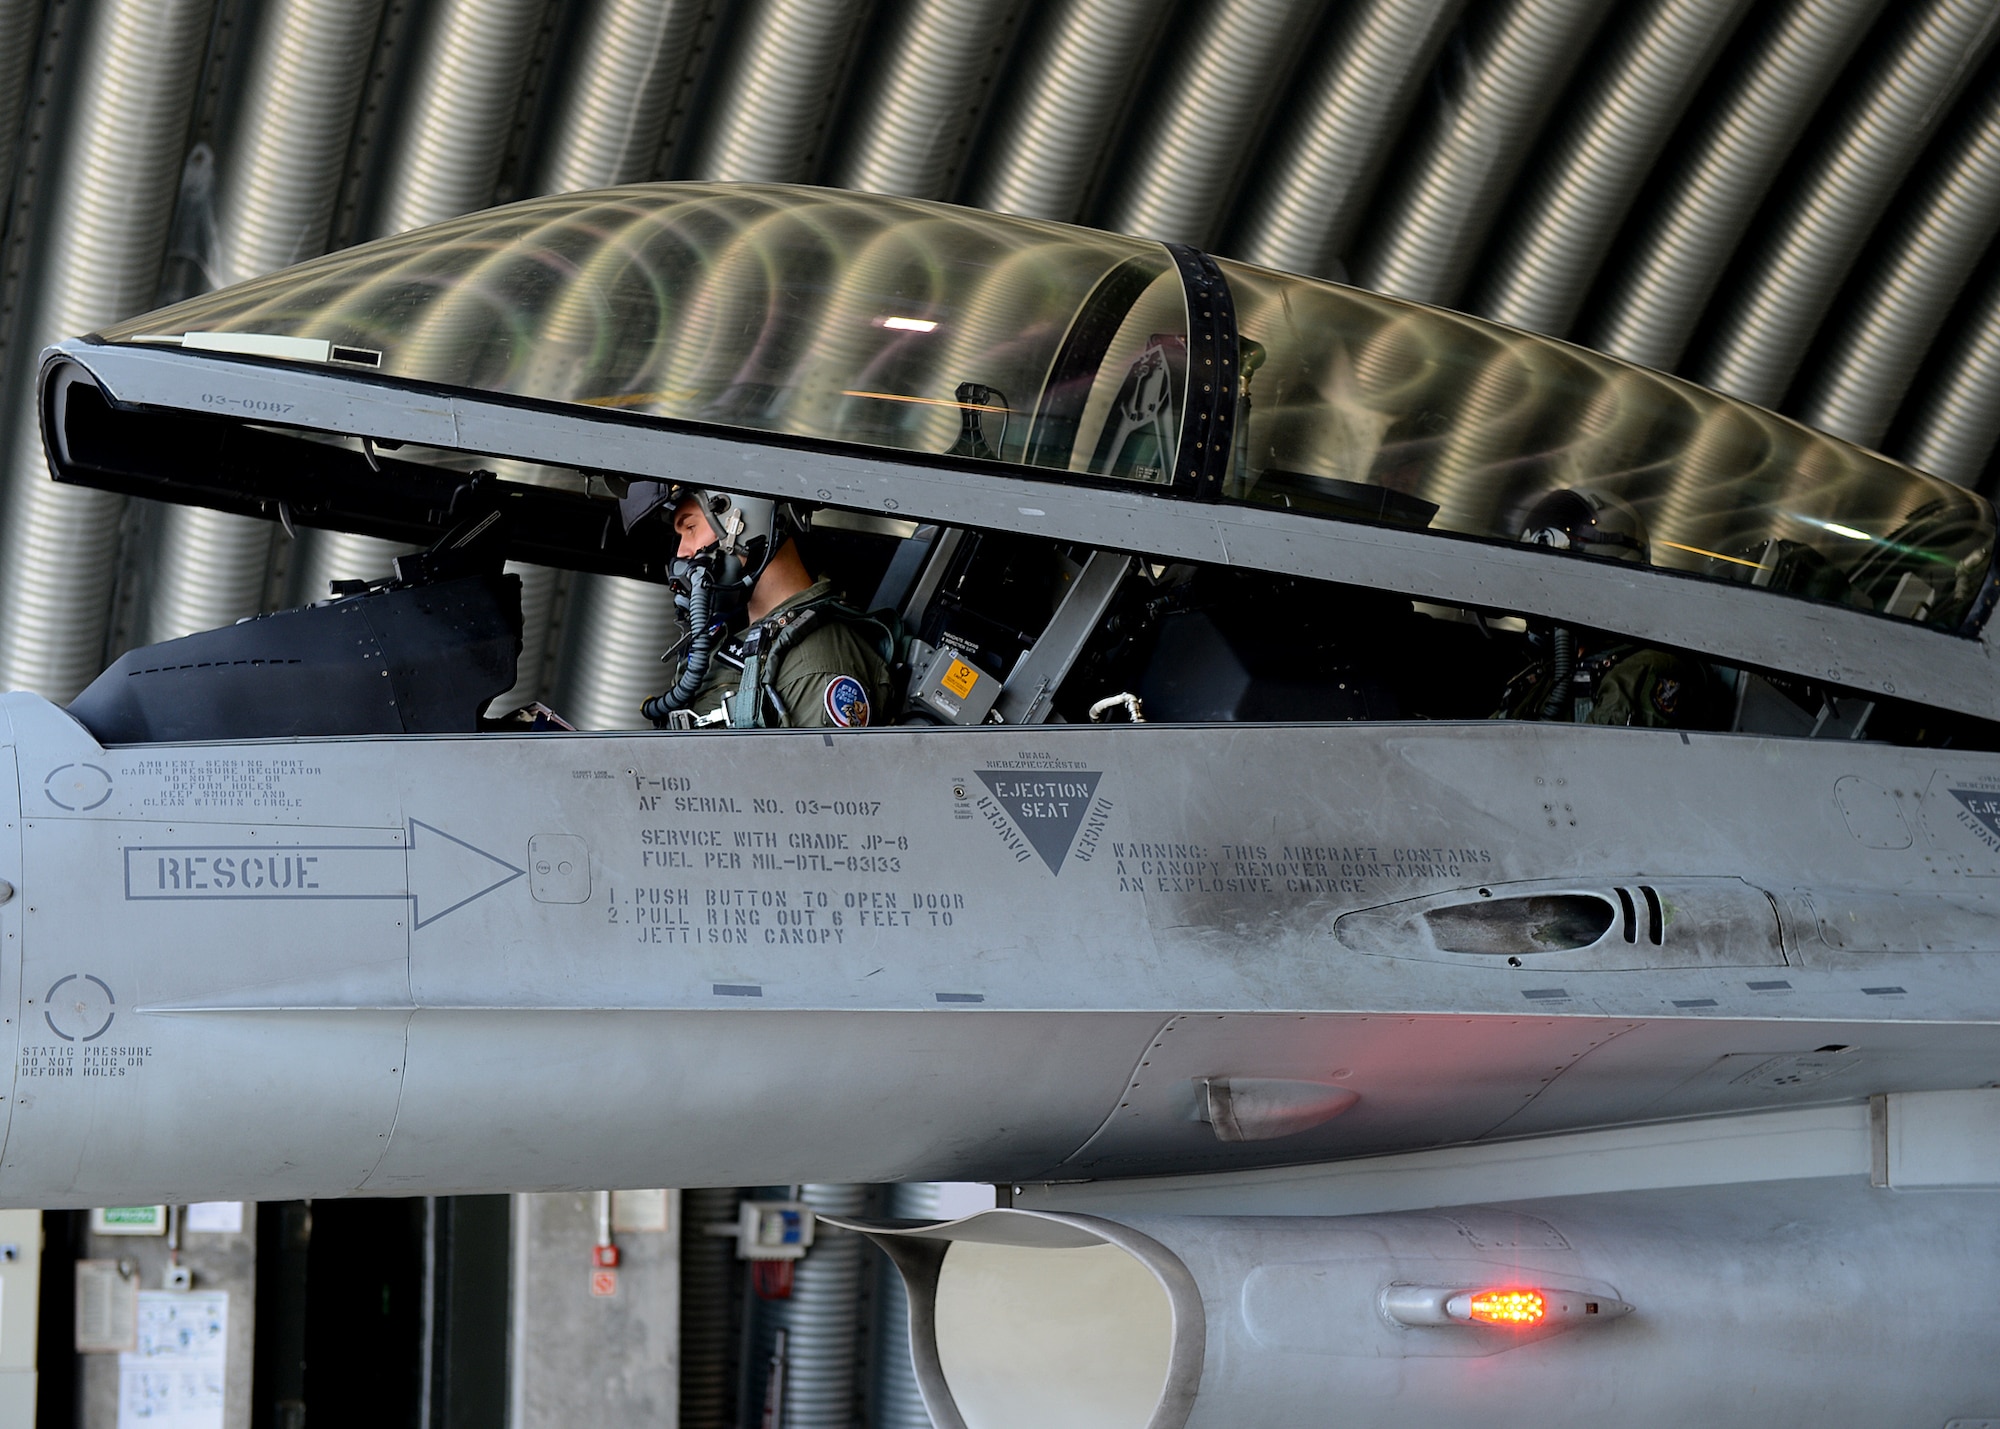 Polish air force 1st Lt. Tomasz Grzybowski, F-16 Fighting Falcon fighter aircraft pilot, and Polish air force 2nd Lt. Komrad Zwolinski, TS-11 and PZL-130 pilot, closes the canopy of the aircraft for departure at Lask Air Base, Poland, June 10, 2014. Grzybowski and Zwolinski participated in Exercise EAGLE TALON, a Polish-led combined exercise, with NATO partners to increase interoperability and familiarize themselves with foreign procedures. (U.S. Air Force photo by Airman 1st Class Kyle Gese/Released)